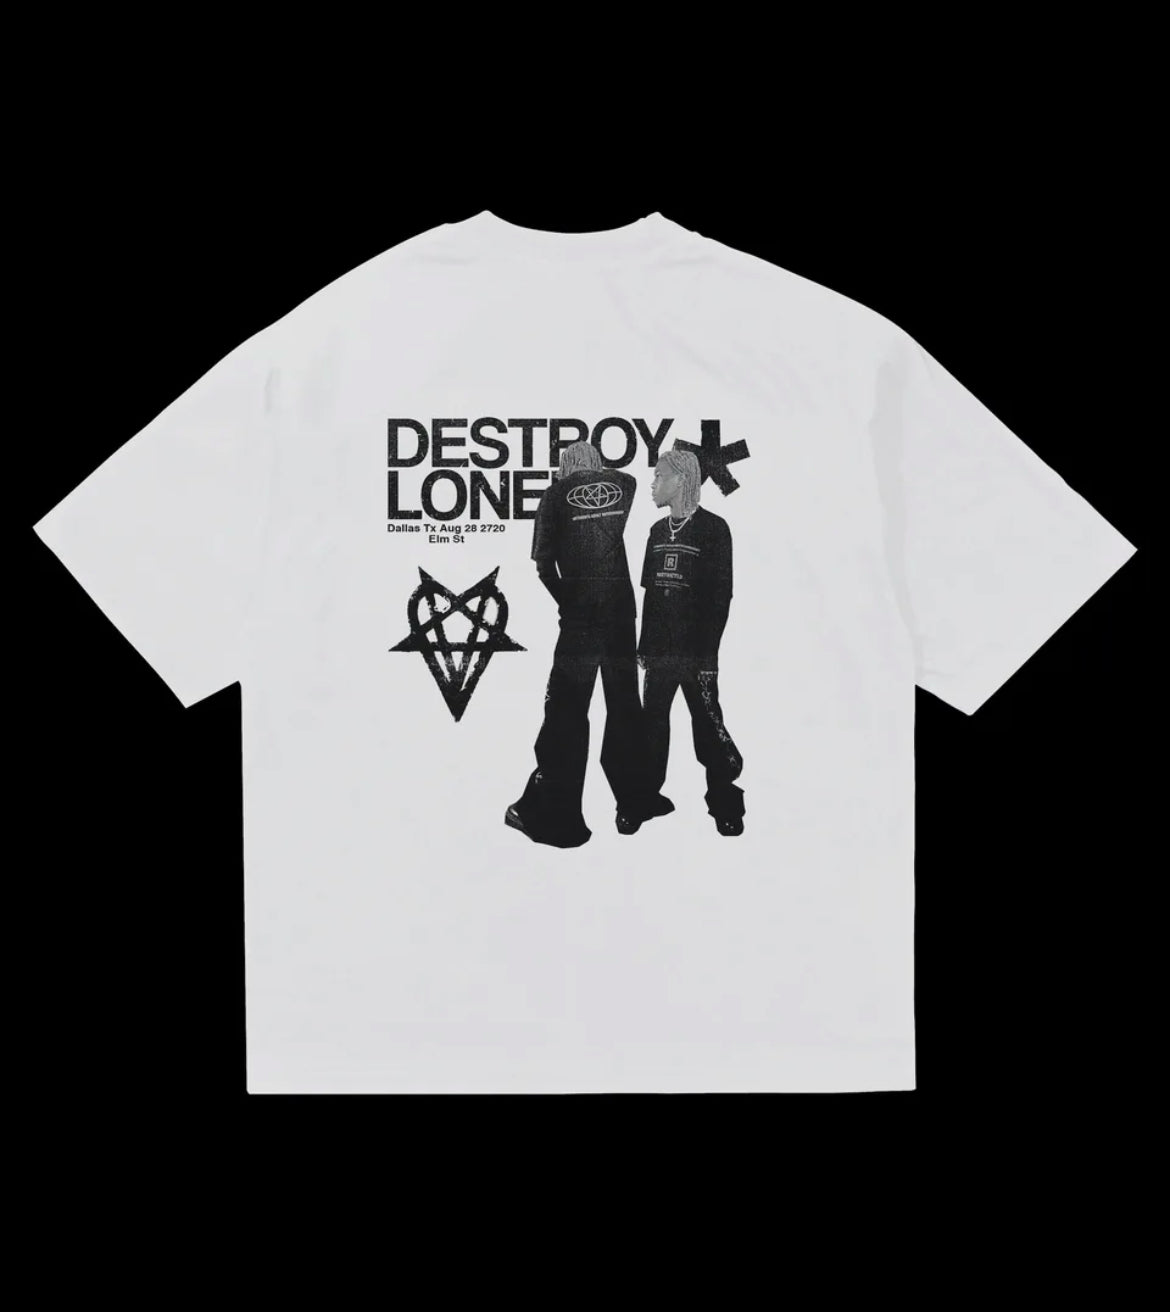 Destroy Lonely hearth t-shirt